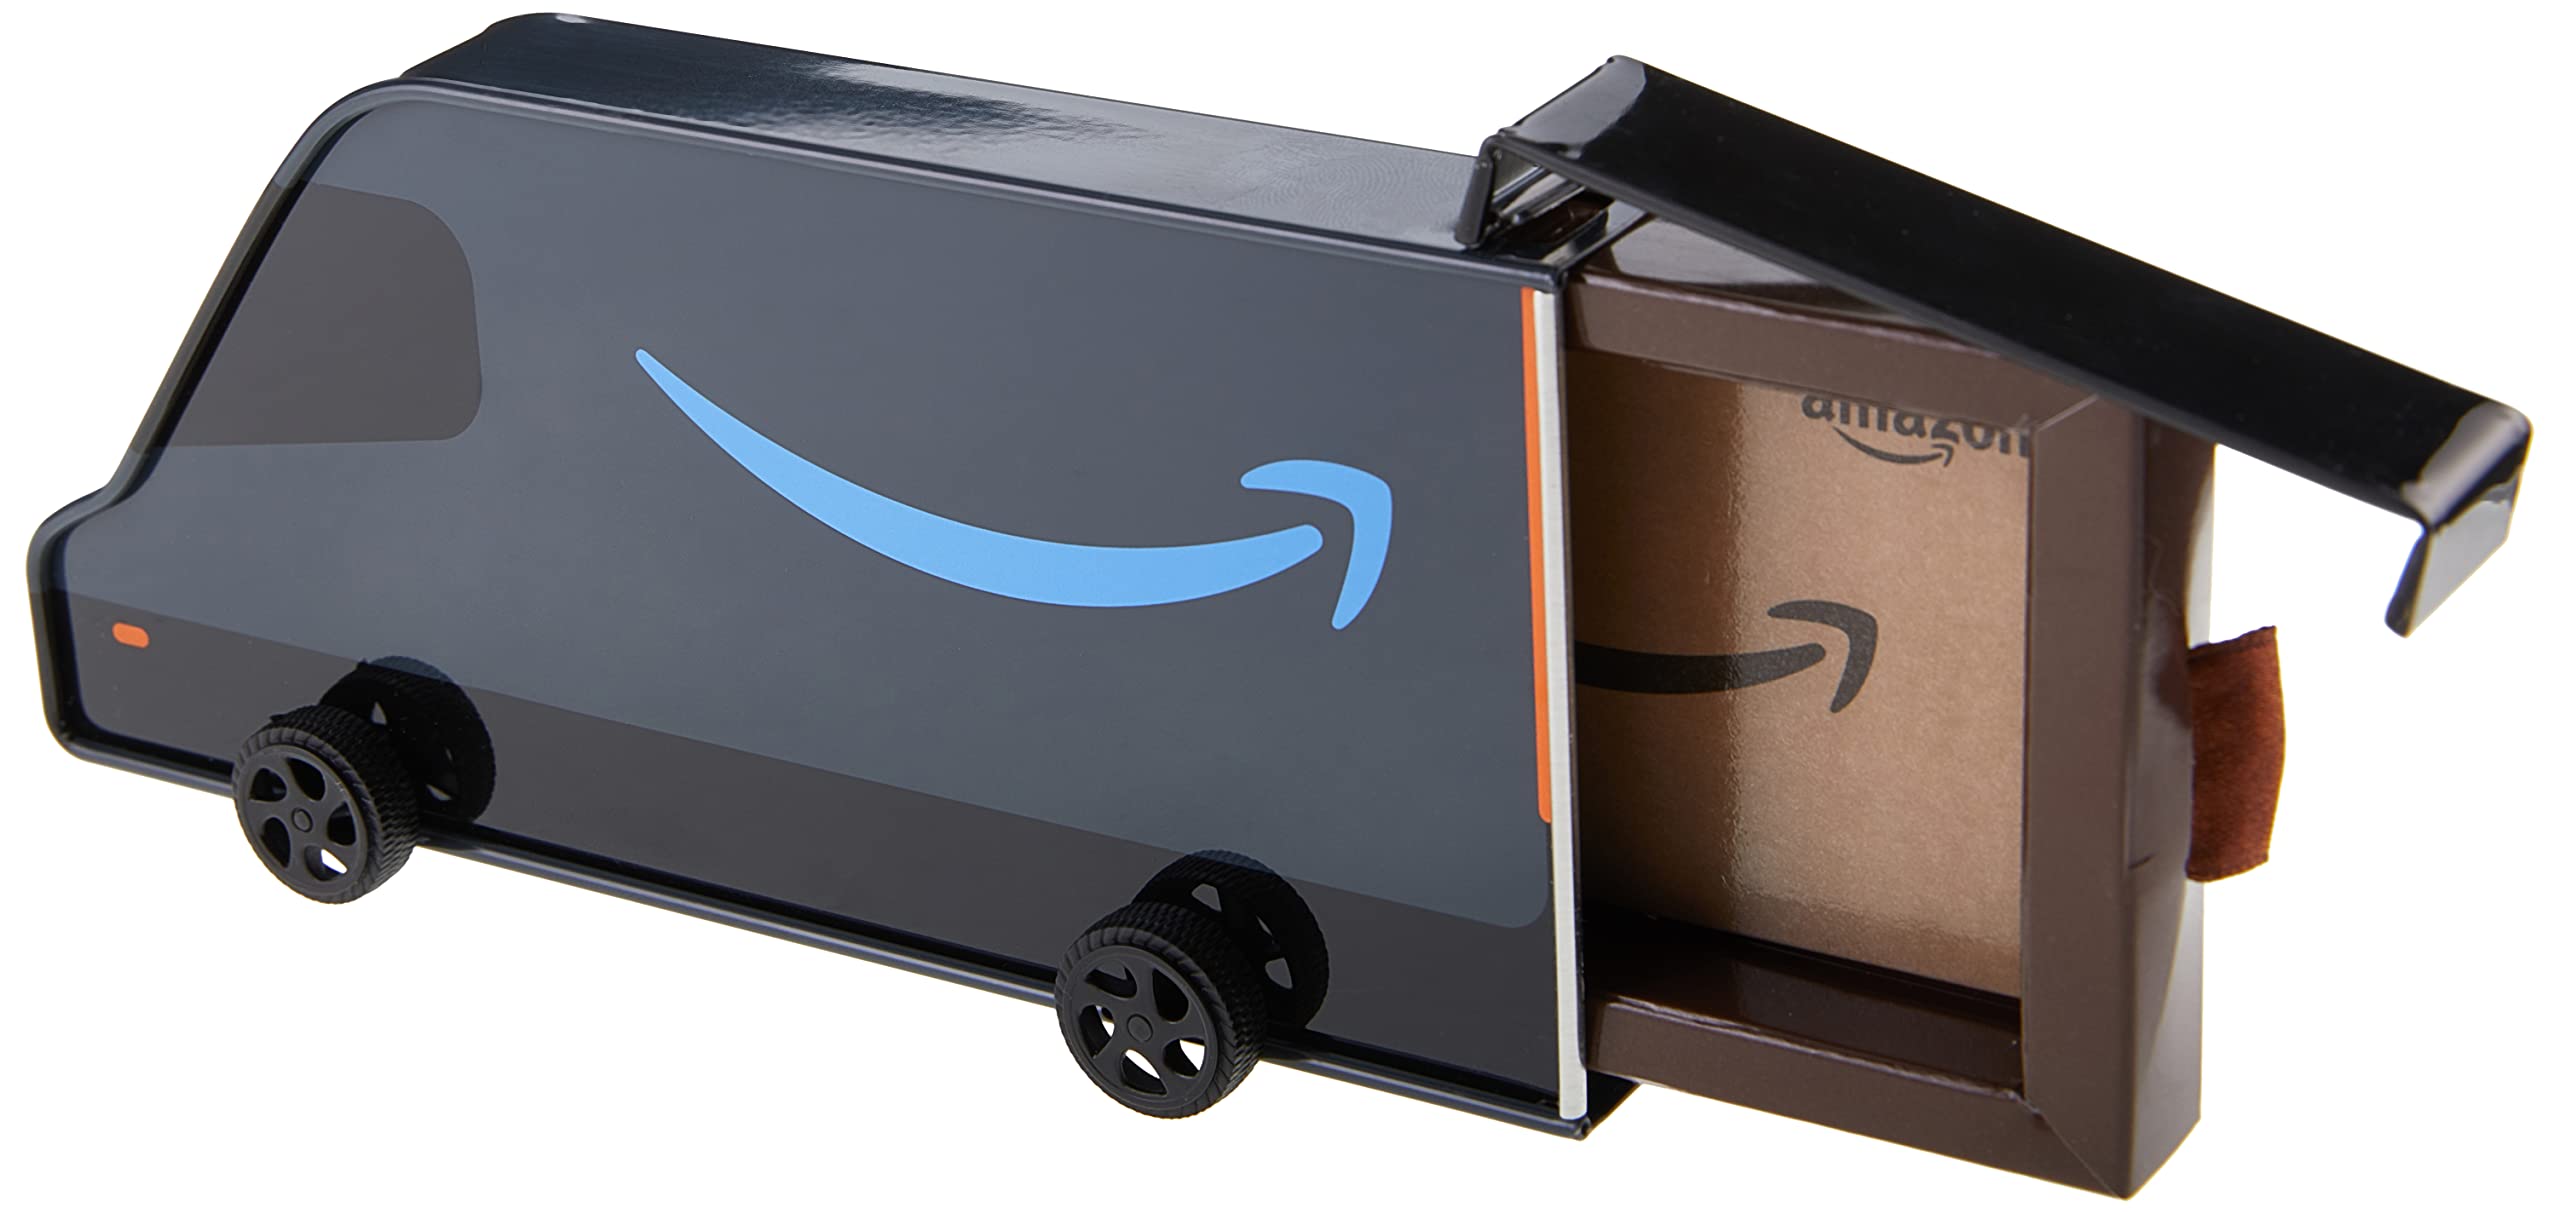 $50 Amazon Gift Card in Limited Edition Prime Van Tin $50 + Free Shipping